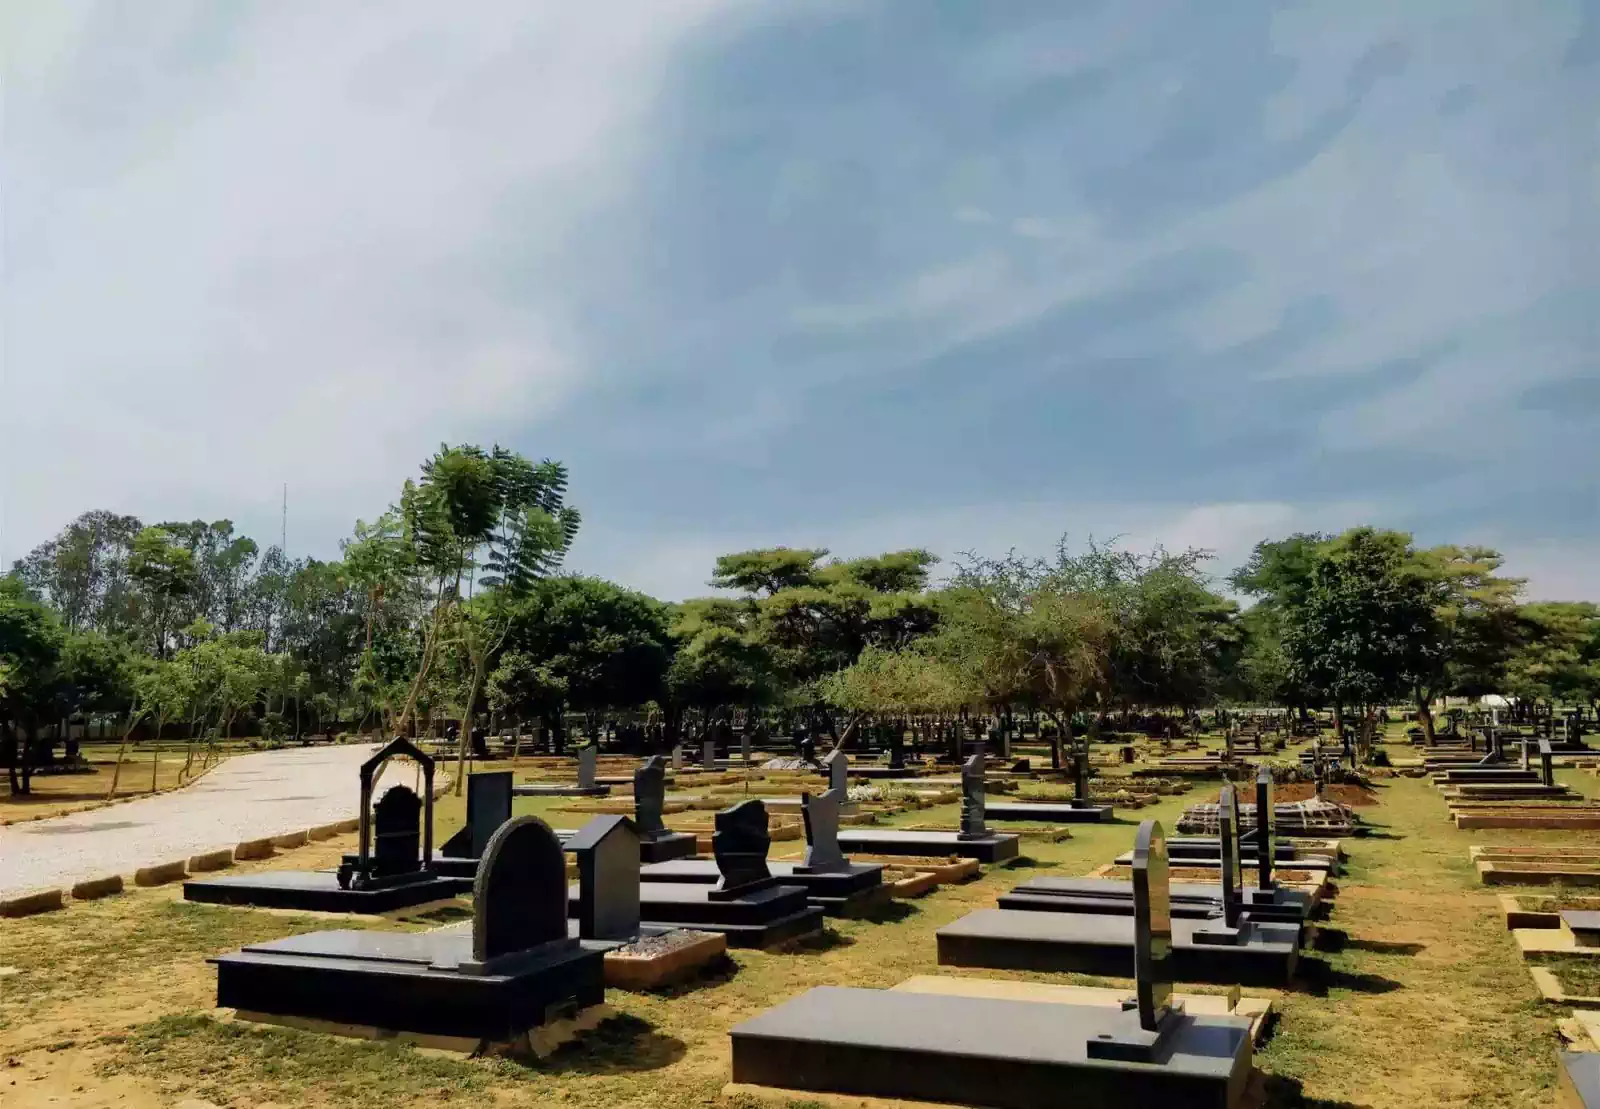 Serene newly built graveyard with tombstones in Leopard's Hill Memorial Park, Lusaka 